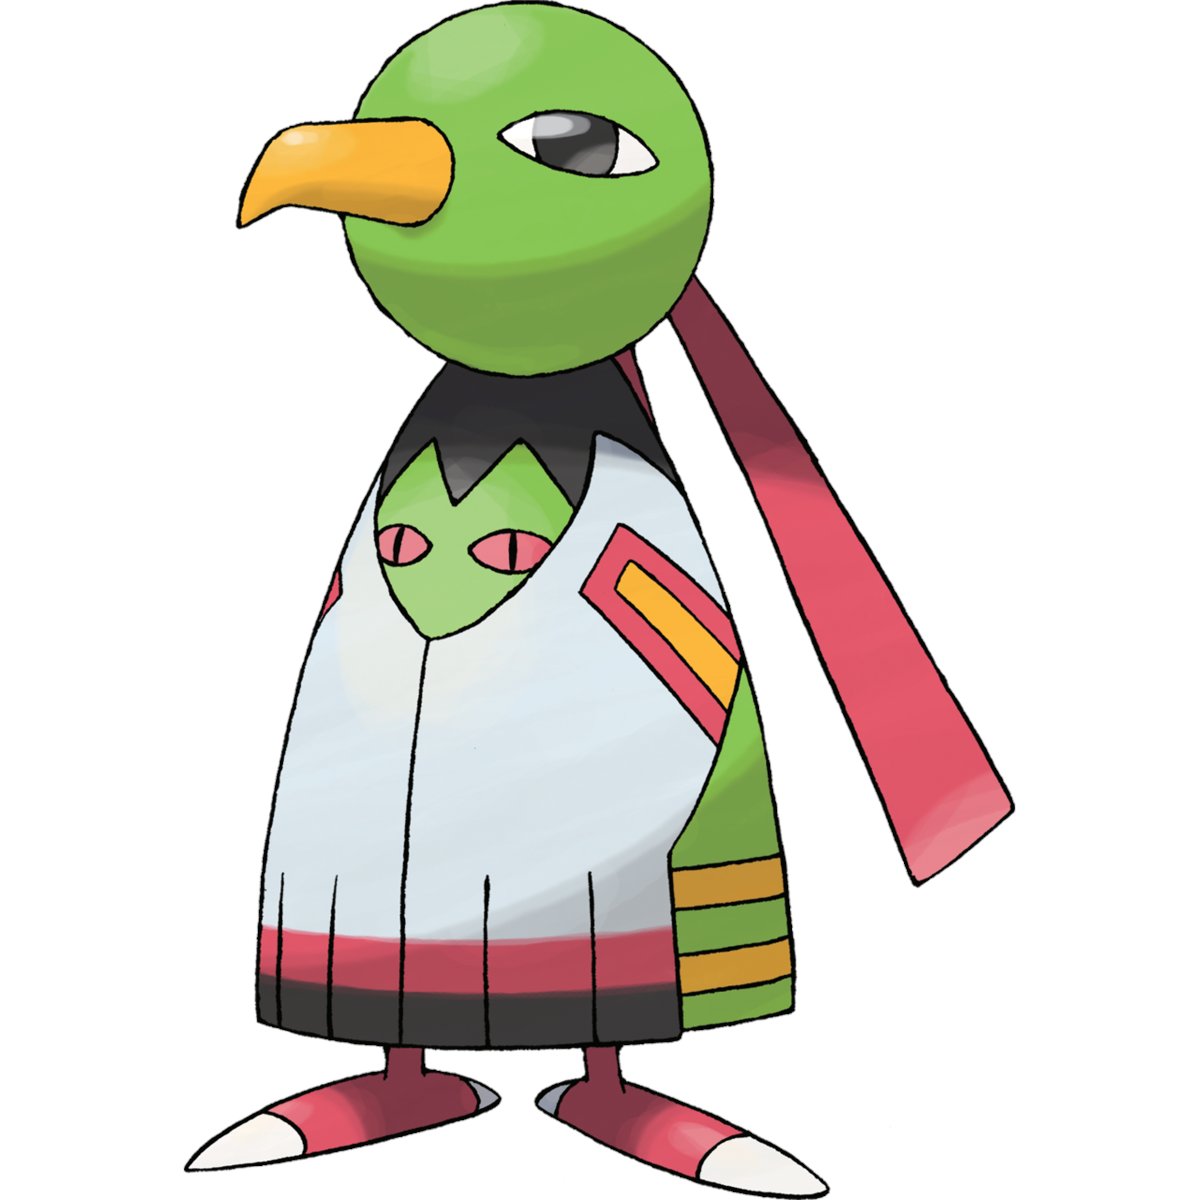 A variant of Natu/Xatu based on the Quetzal! With its Psychic typing and Xatu known to stare at the sun, I think it would be cool if this variant evolved into a more snake-like bird version to reference Quetzalcoatl! Psychic/Fire type